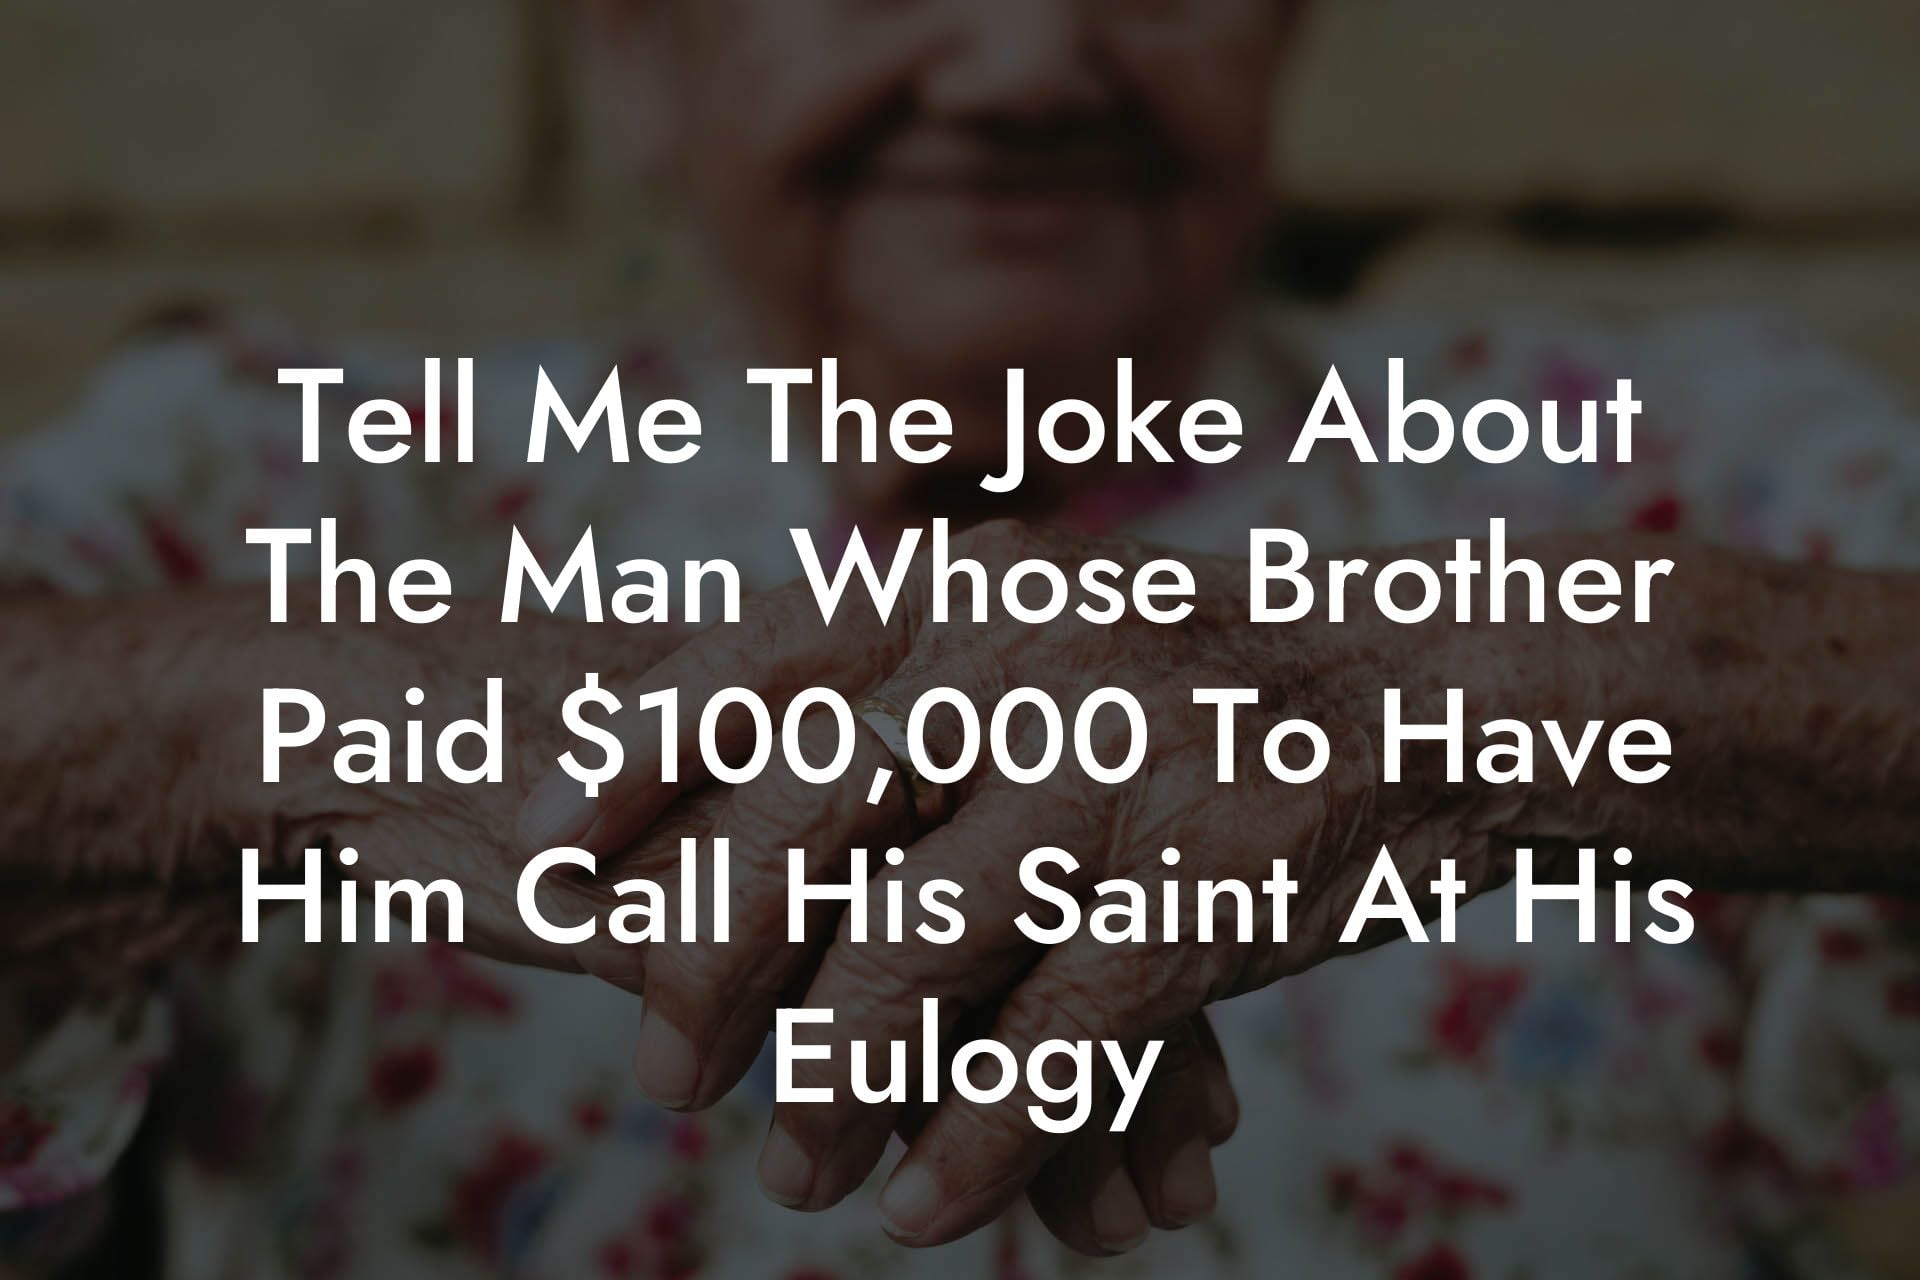 Tell Me The Joke About The Man Whose Brother Paid $100,000 To Have Him Call His Saint At His Eulogy